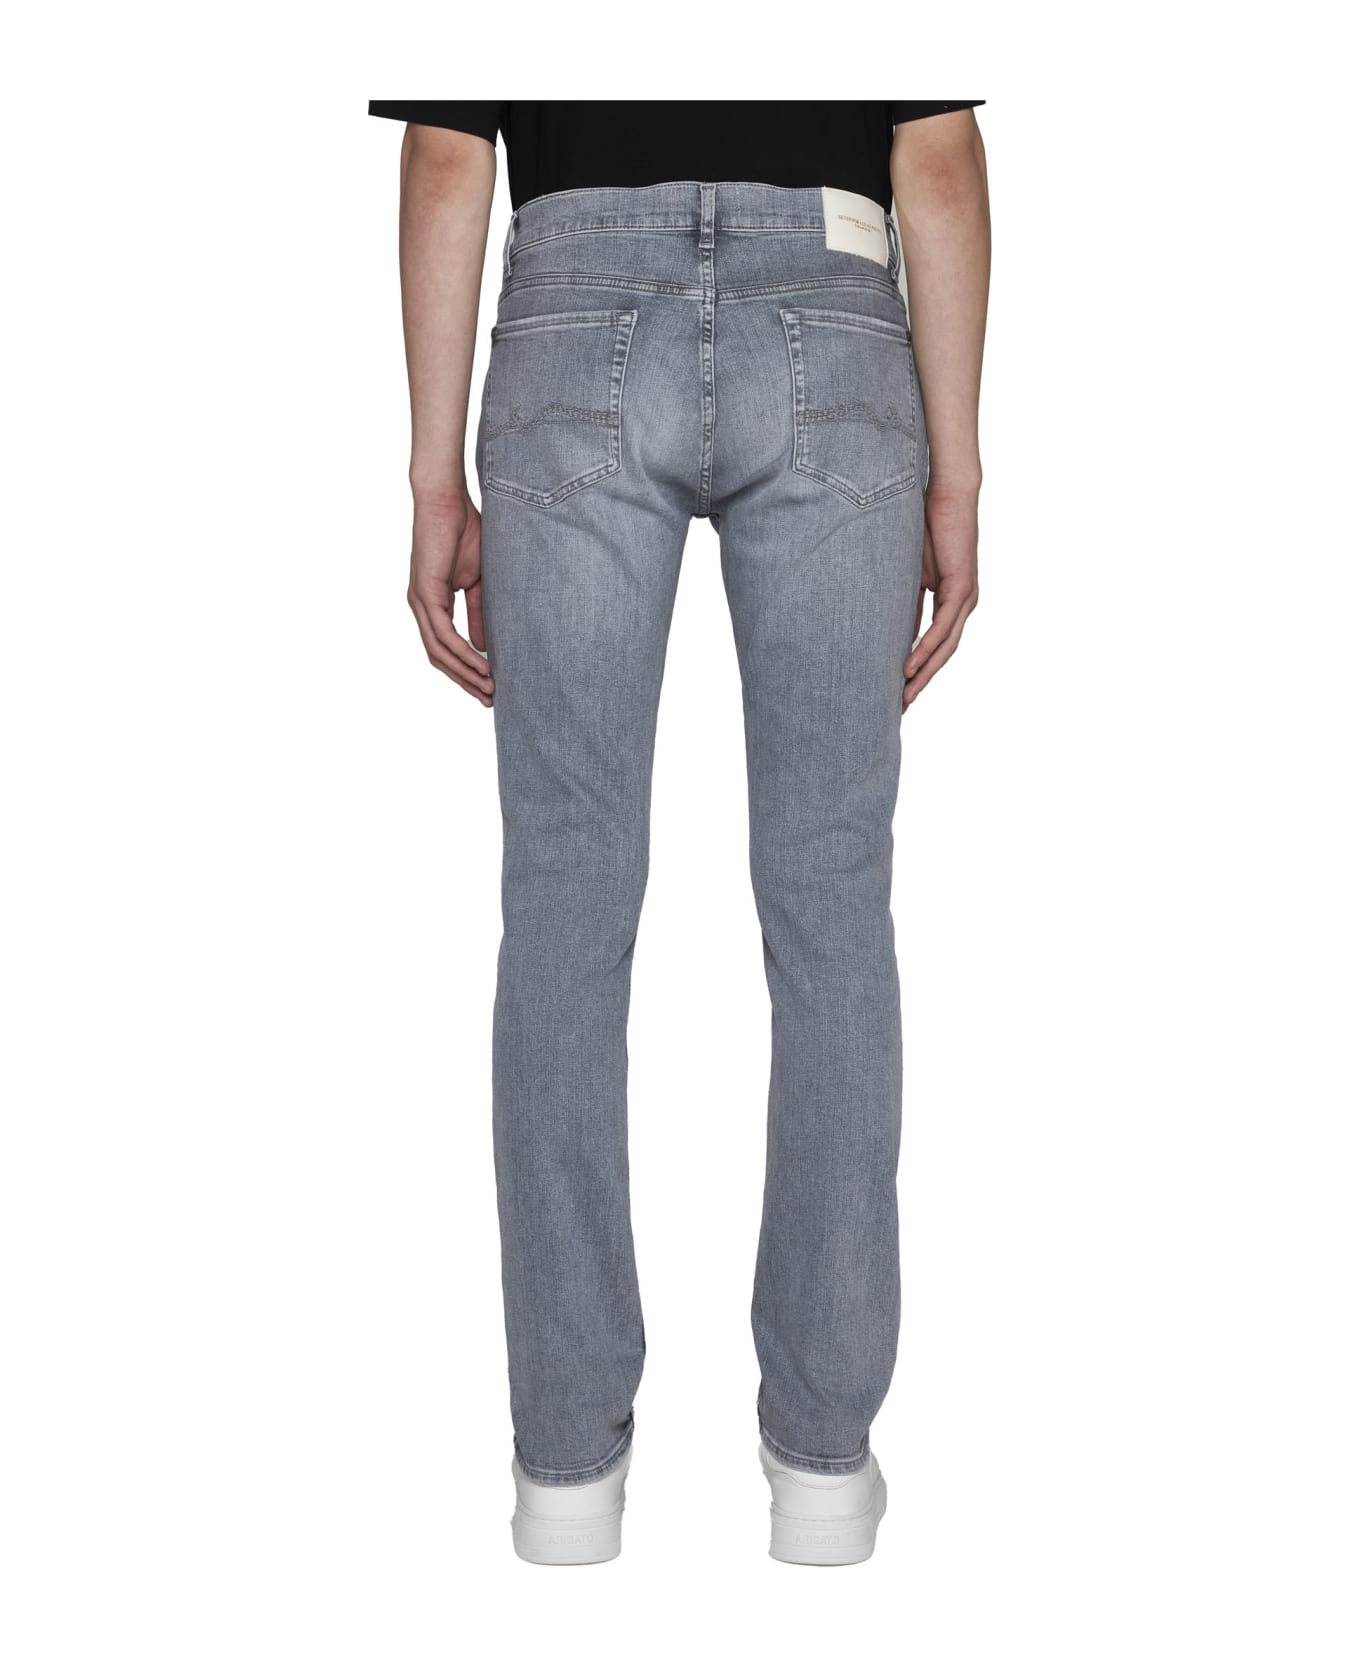 7 For All Mankind Jeans - Grey デニム